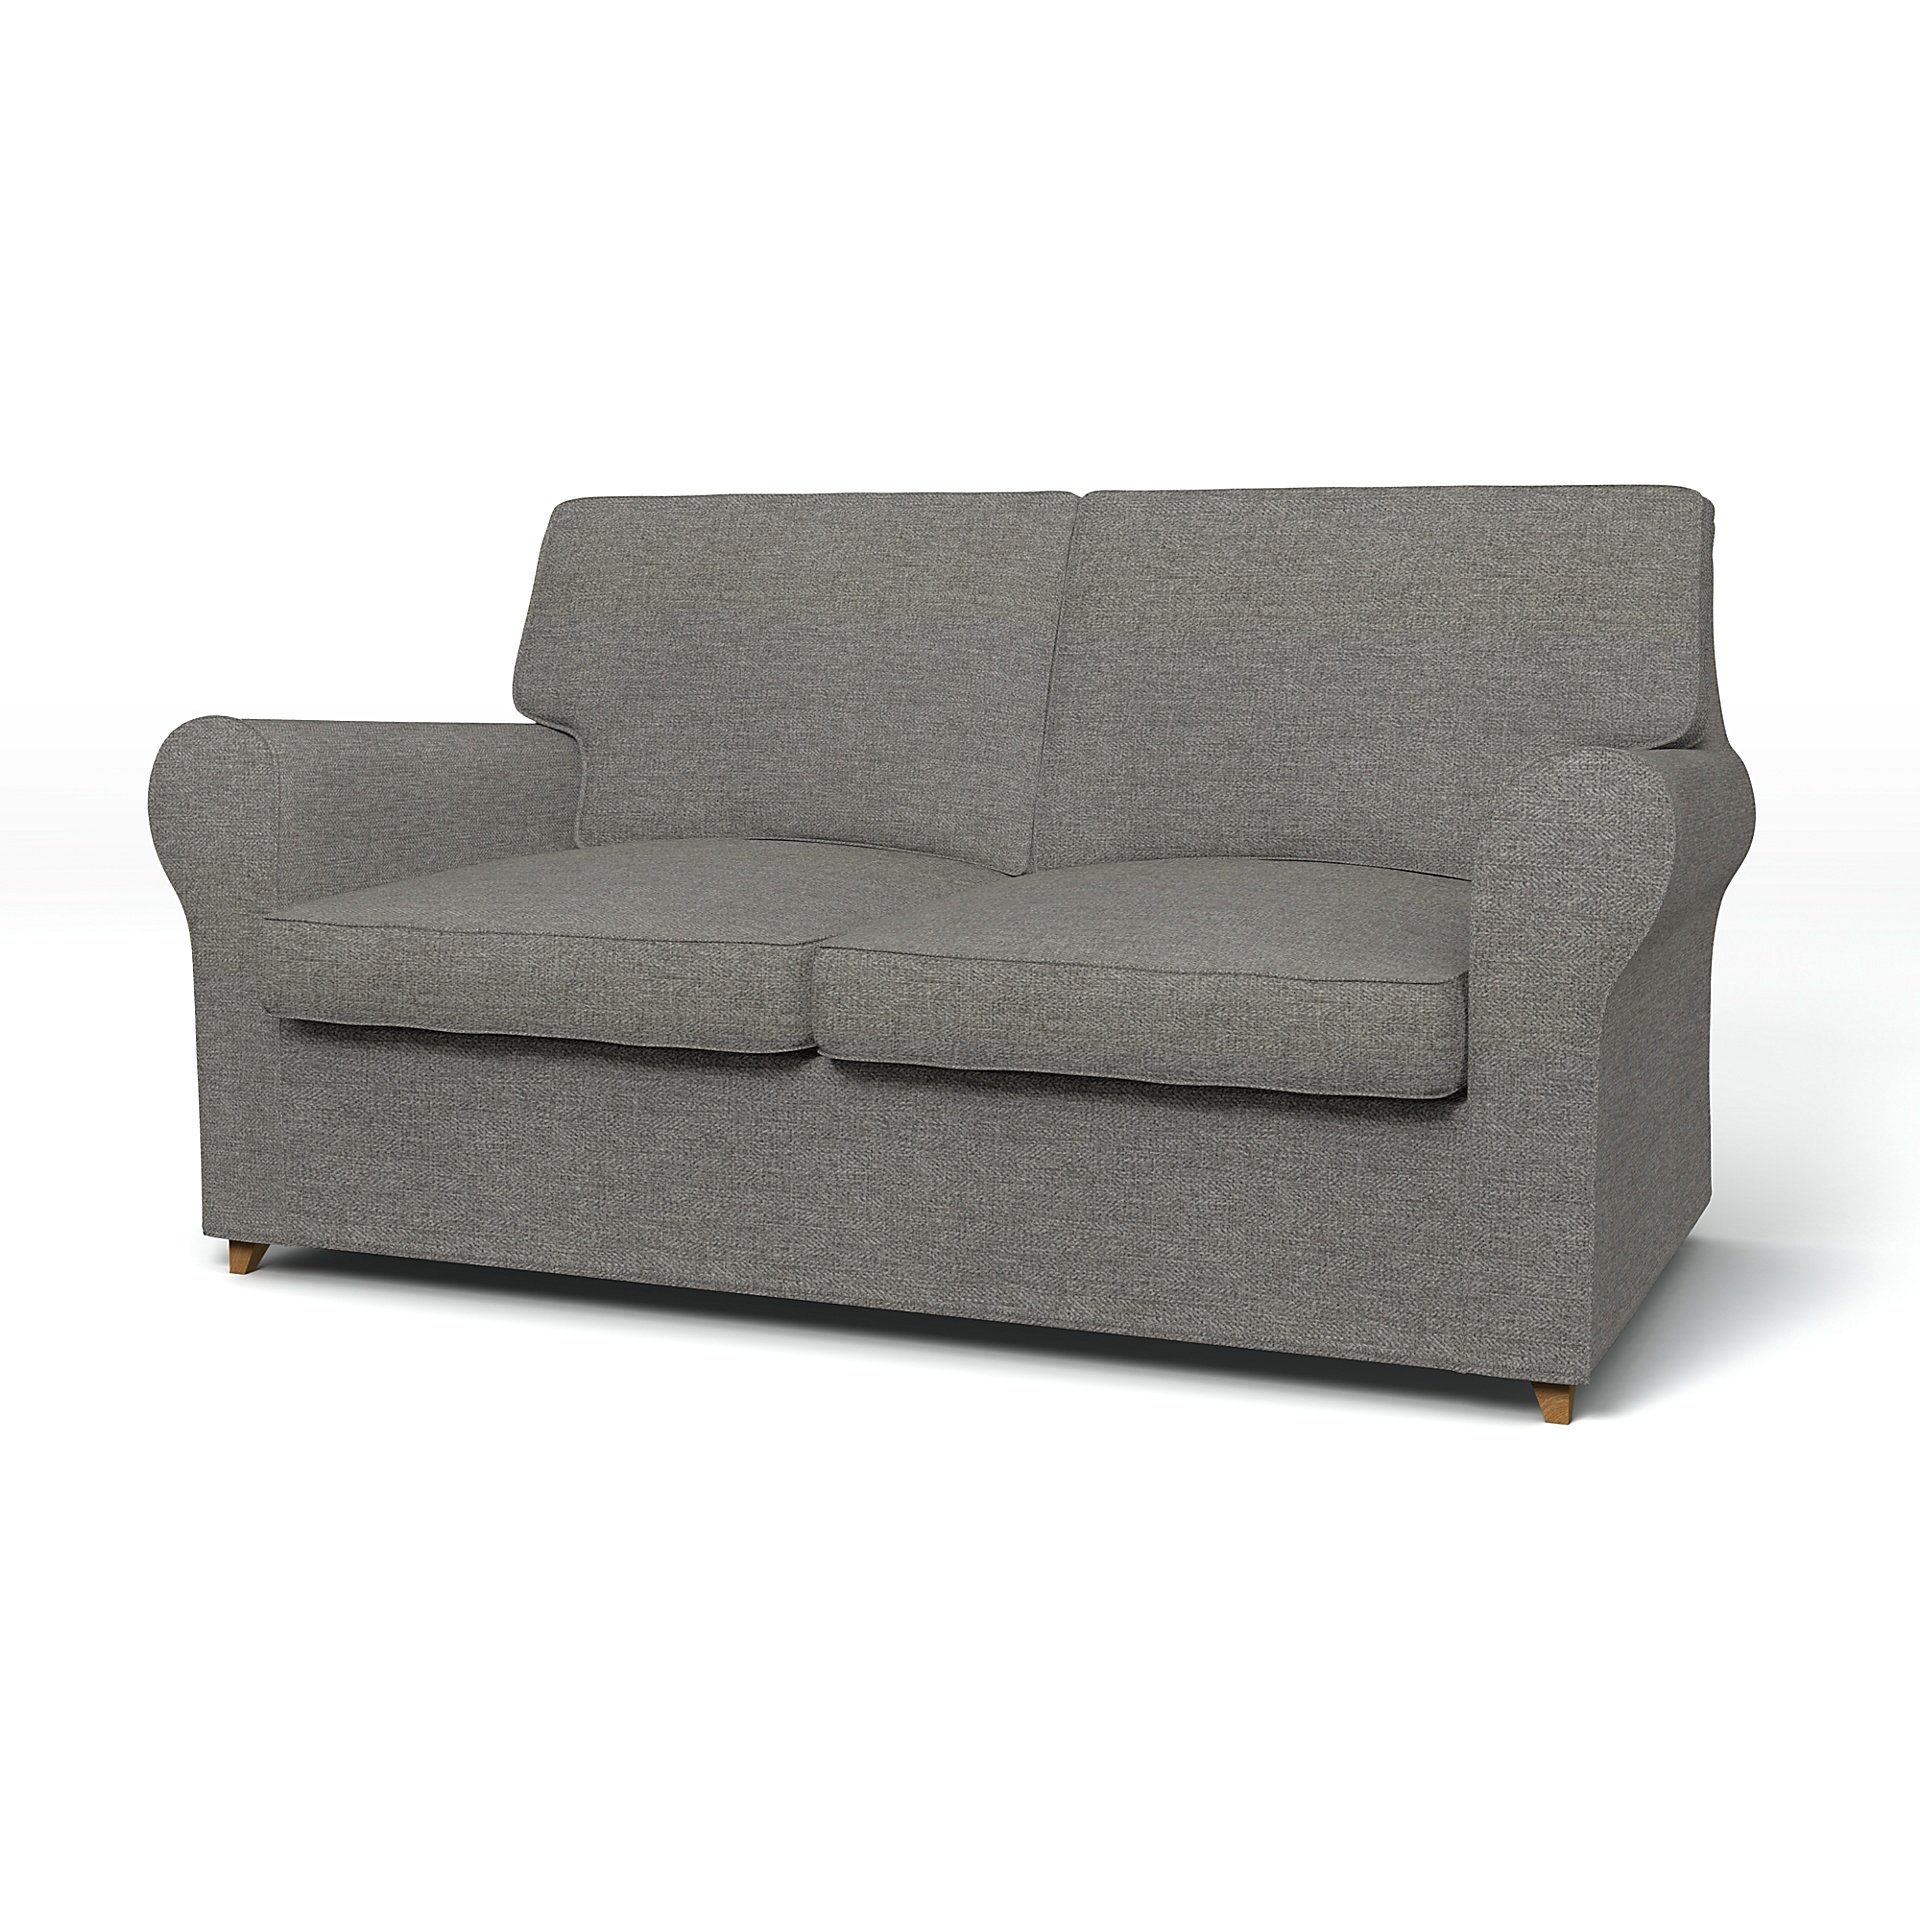 IKEA - Angby 2 Seater Sofa Cover, Taupe, Boucle & Texture - Bemz